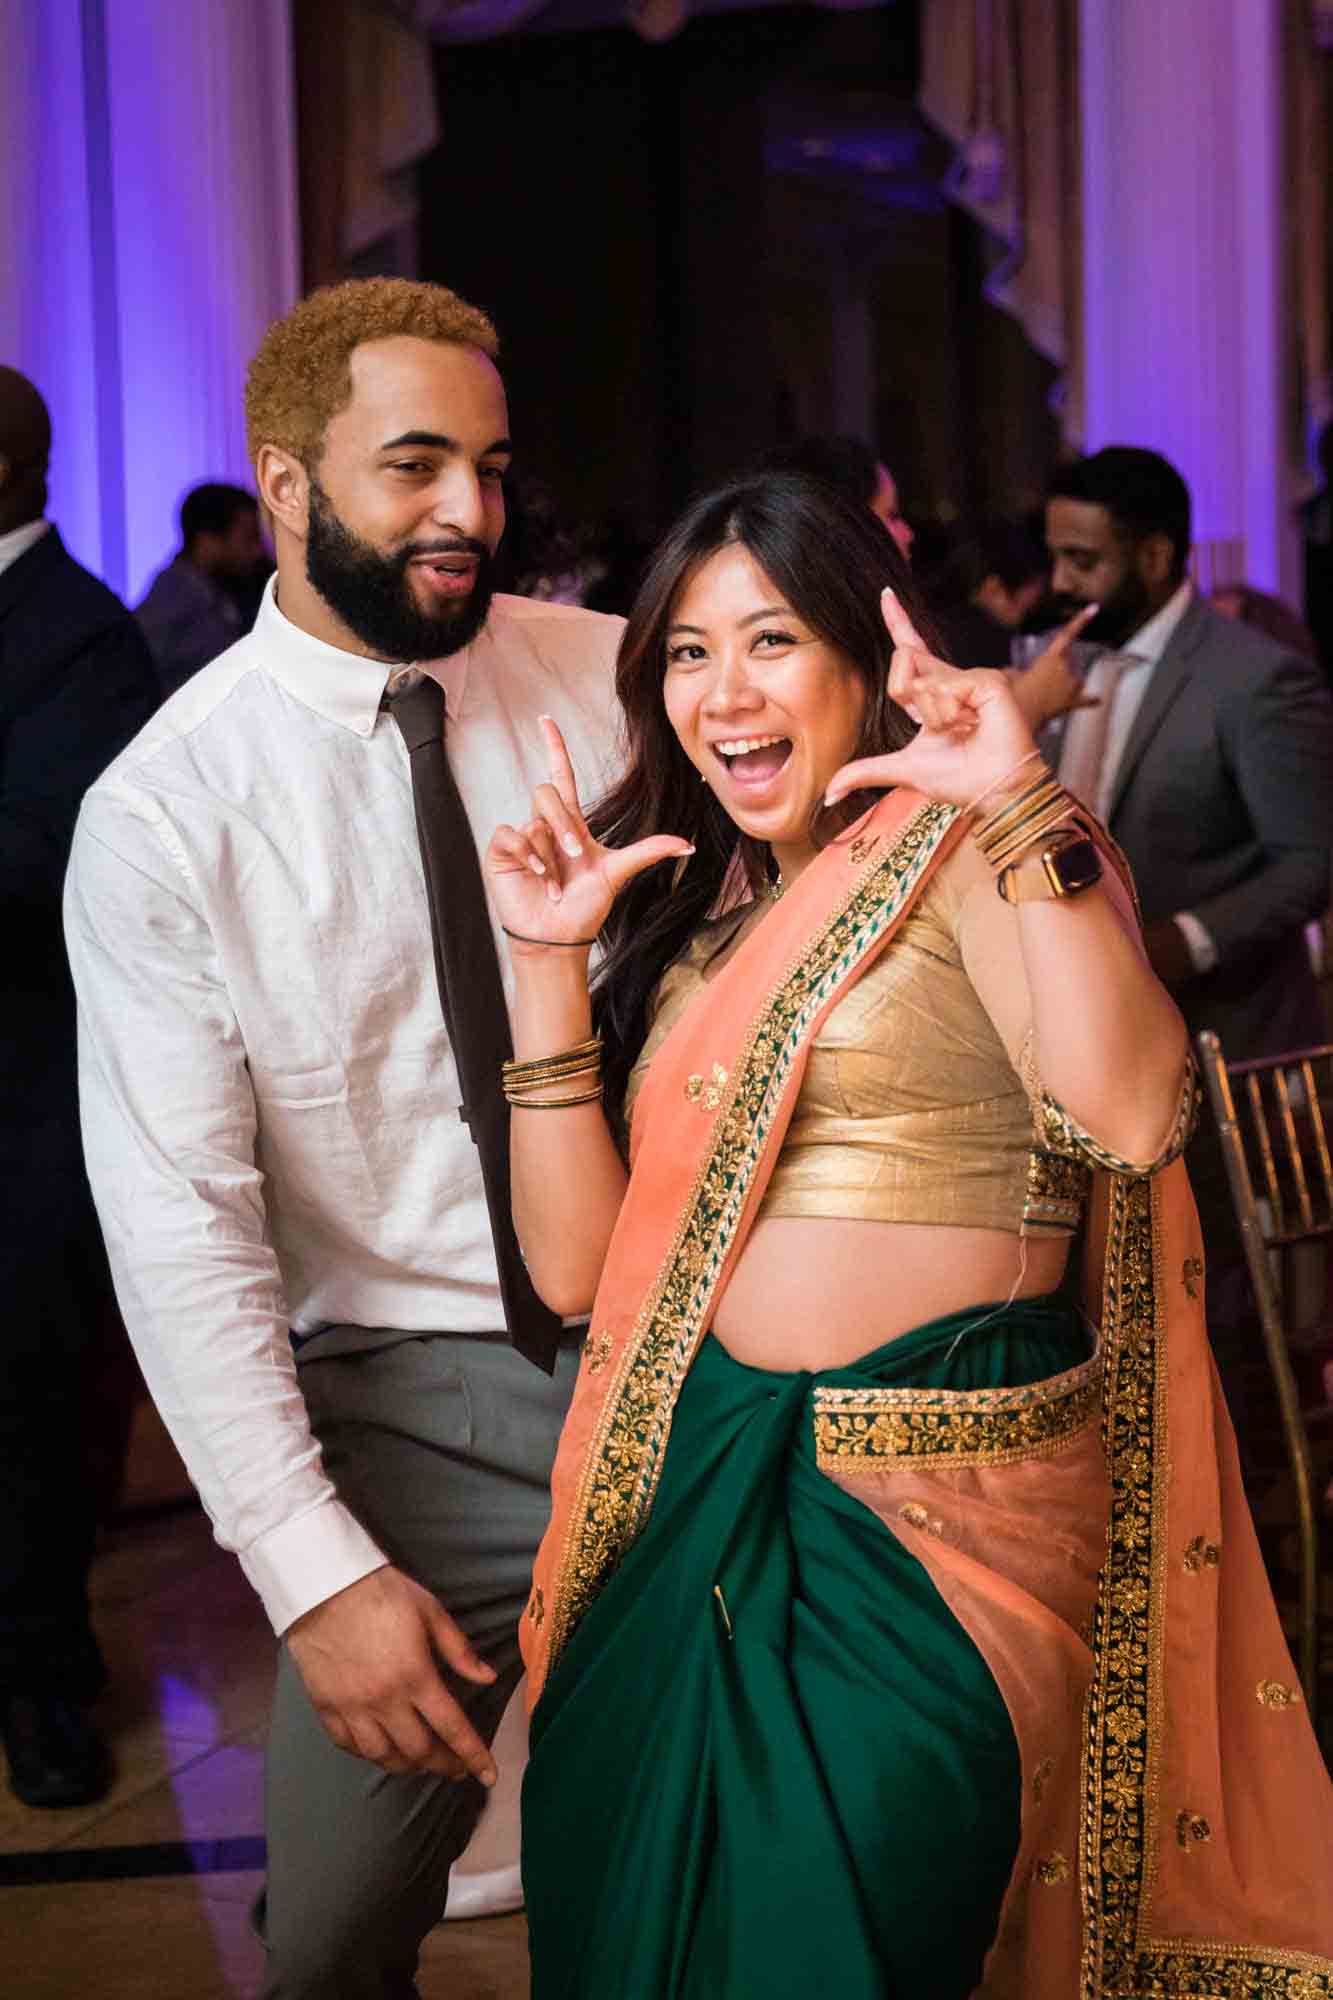 Asian woman wearing peach and green sari dancing with man in white shirt and tie for an article on Terrace on the Park wedding photo tips